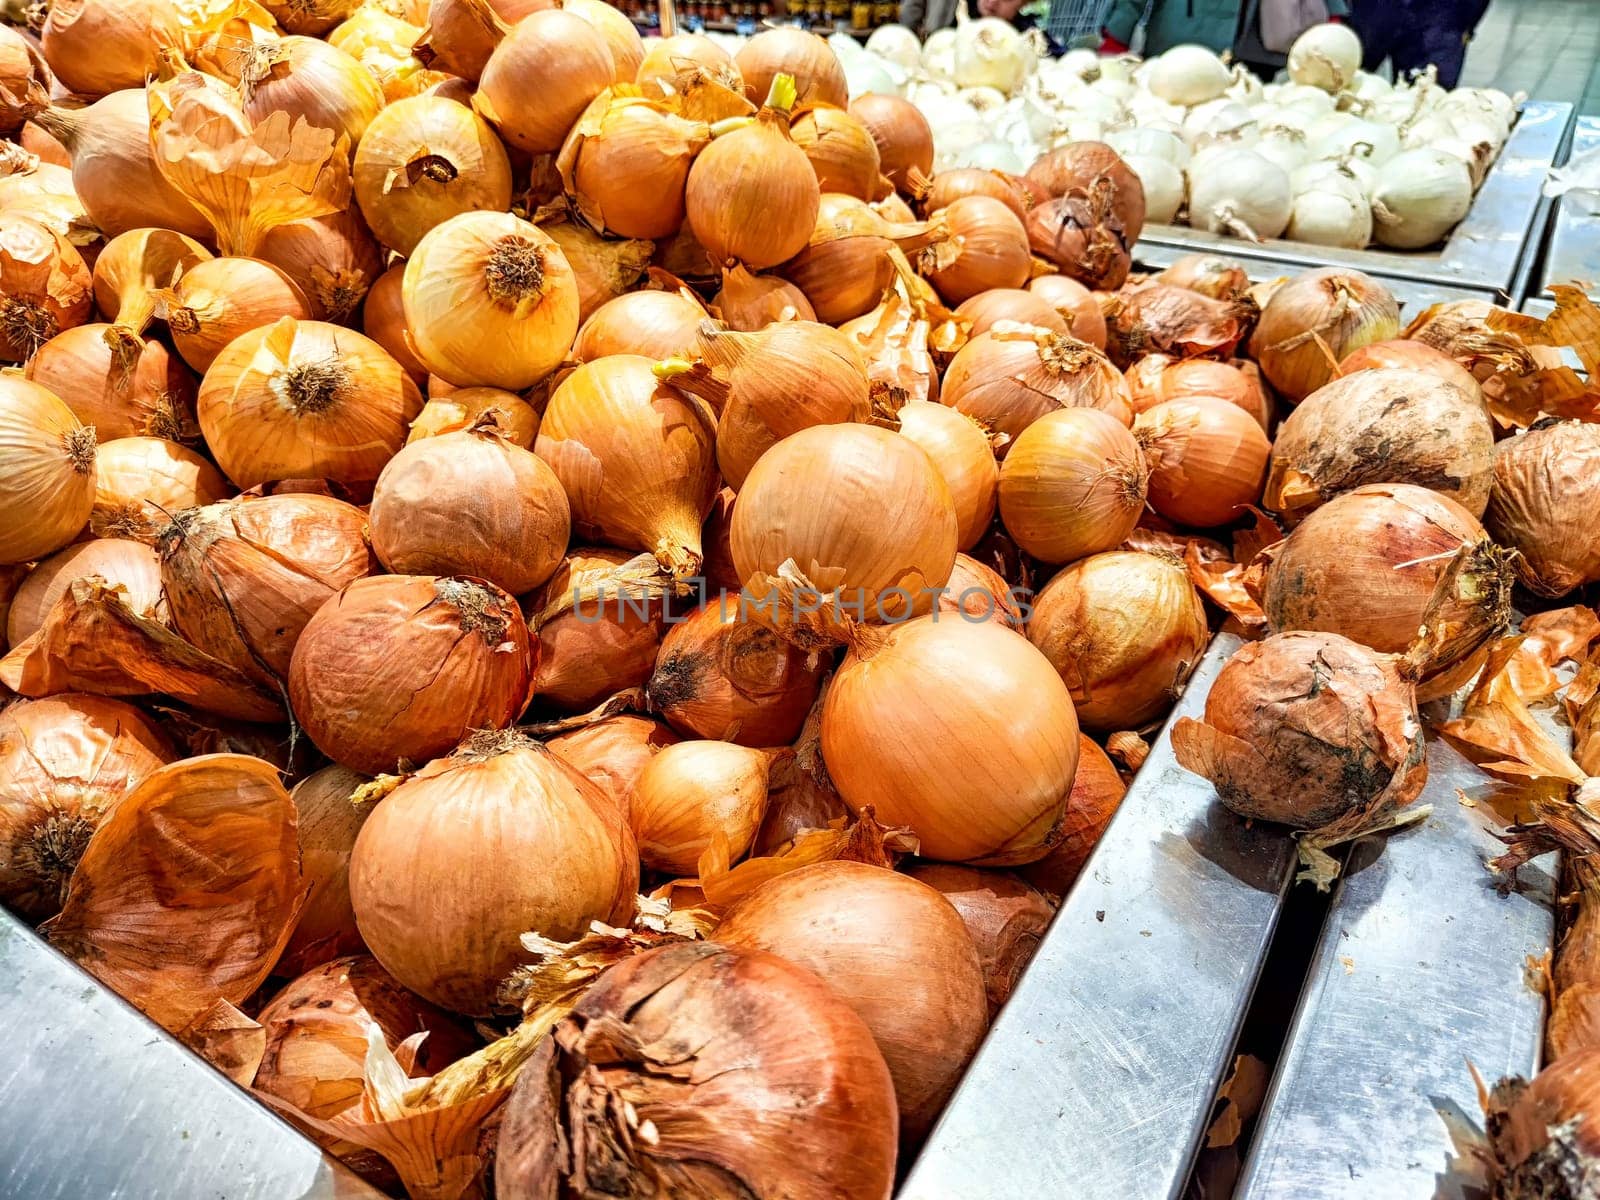 Fresh onions spread out for customers at a market. Pile of Fresh Onions for Sale at Local Market Stall